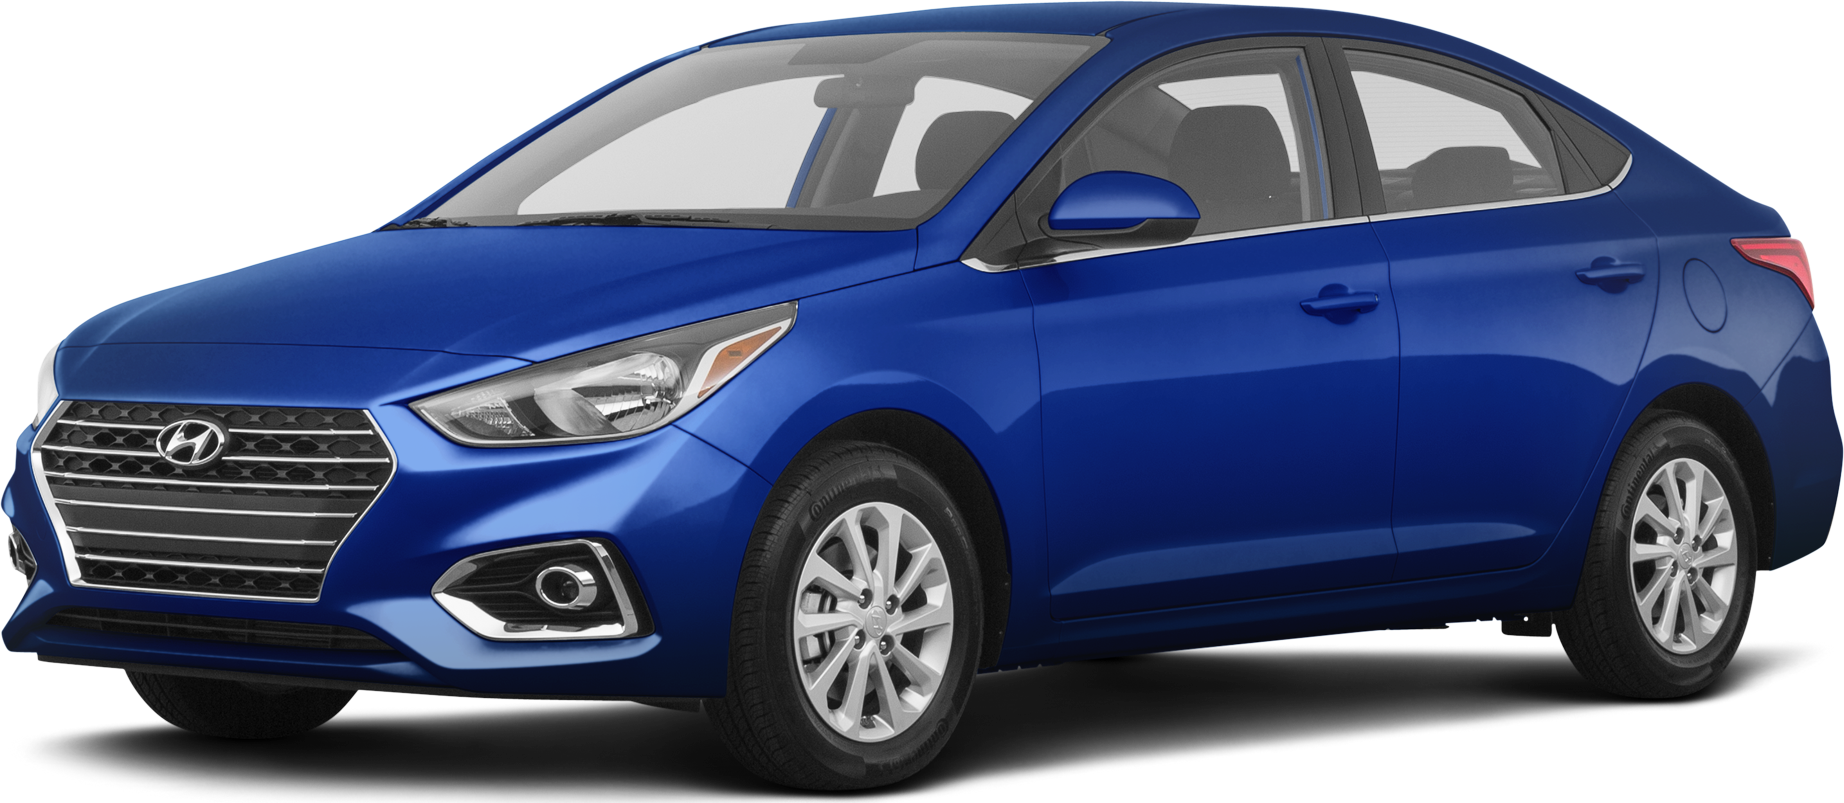 2021 Hyundai Accent Reviews, Pricing & Specs | Kelley Blue Book